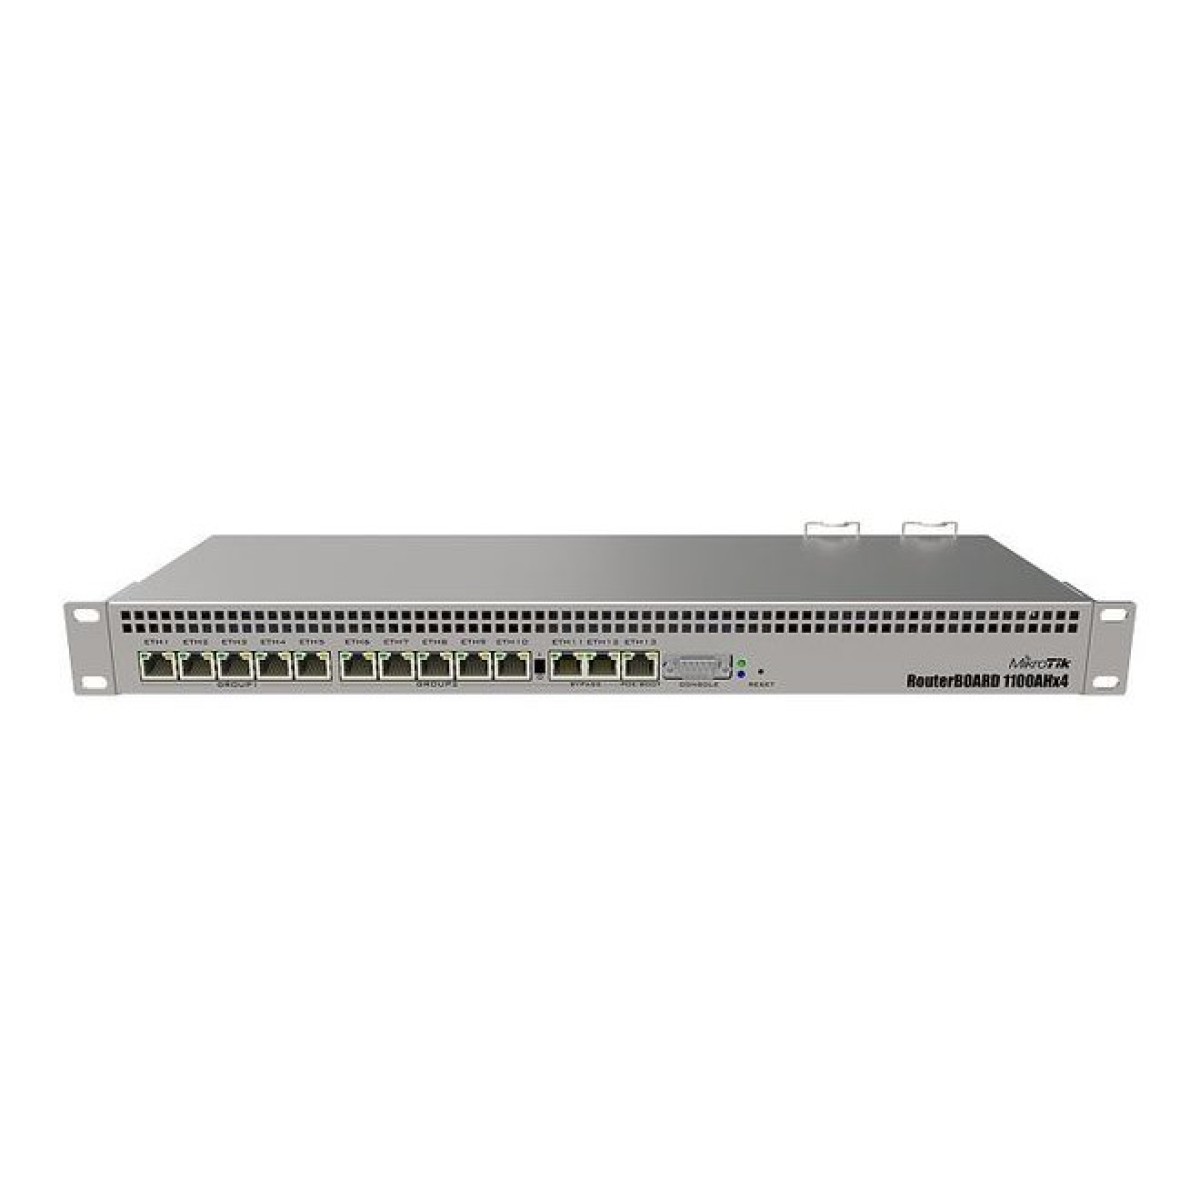 Маршрутизатор MikroTik RouterBOARD 1100AHx4 256_256.jpg